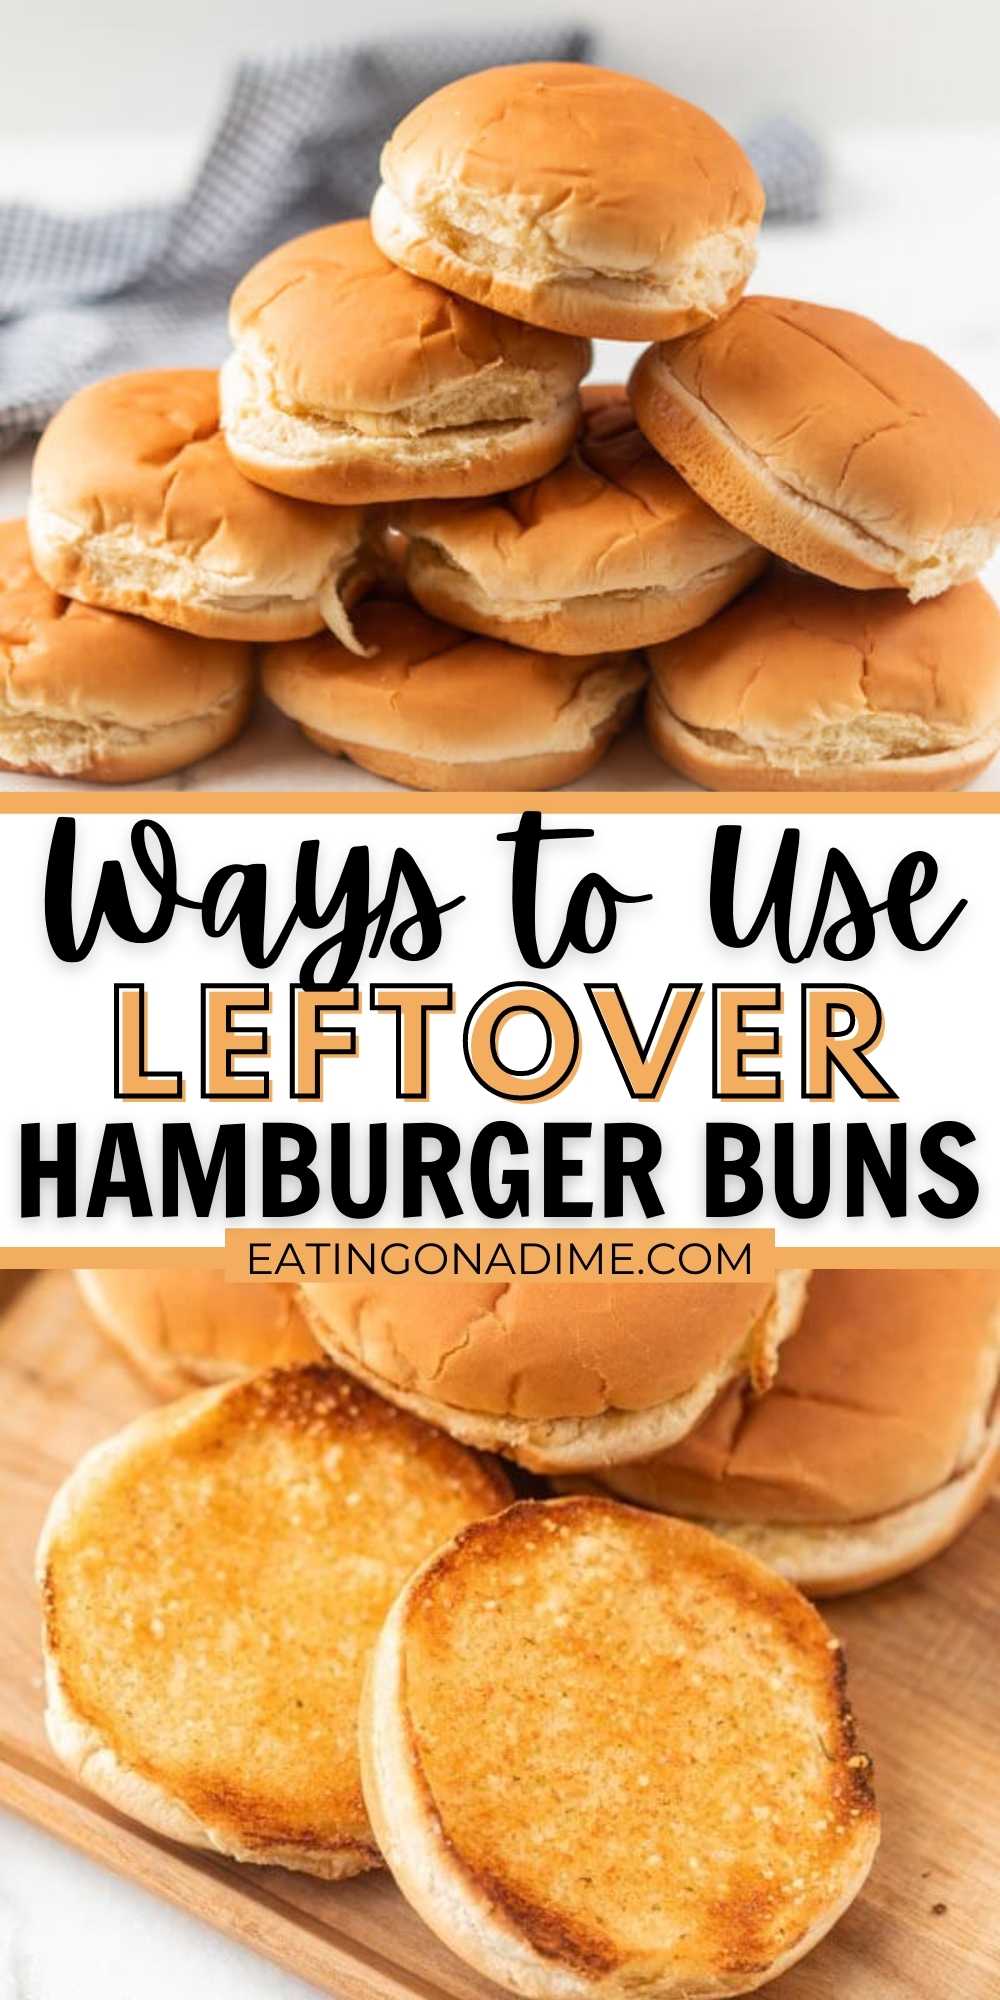 Don't throw away those hamburger buns leftover from the grilling party. Instead checkout this post on different ways to use leftover hamburger buns. You are going to love these leftover hamburger bun ideas that will save money and food!  #eatingonadime #leftovers #hamburgerbunrecipes 
